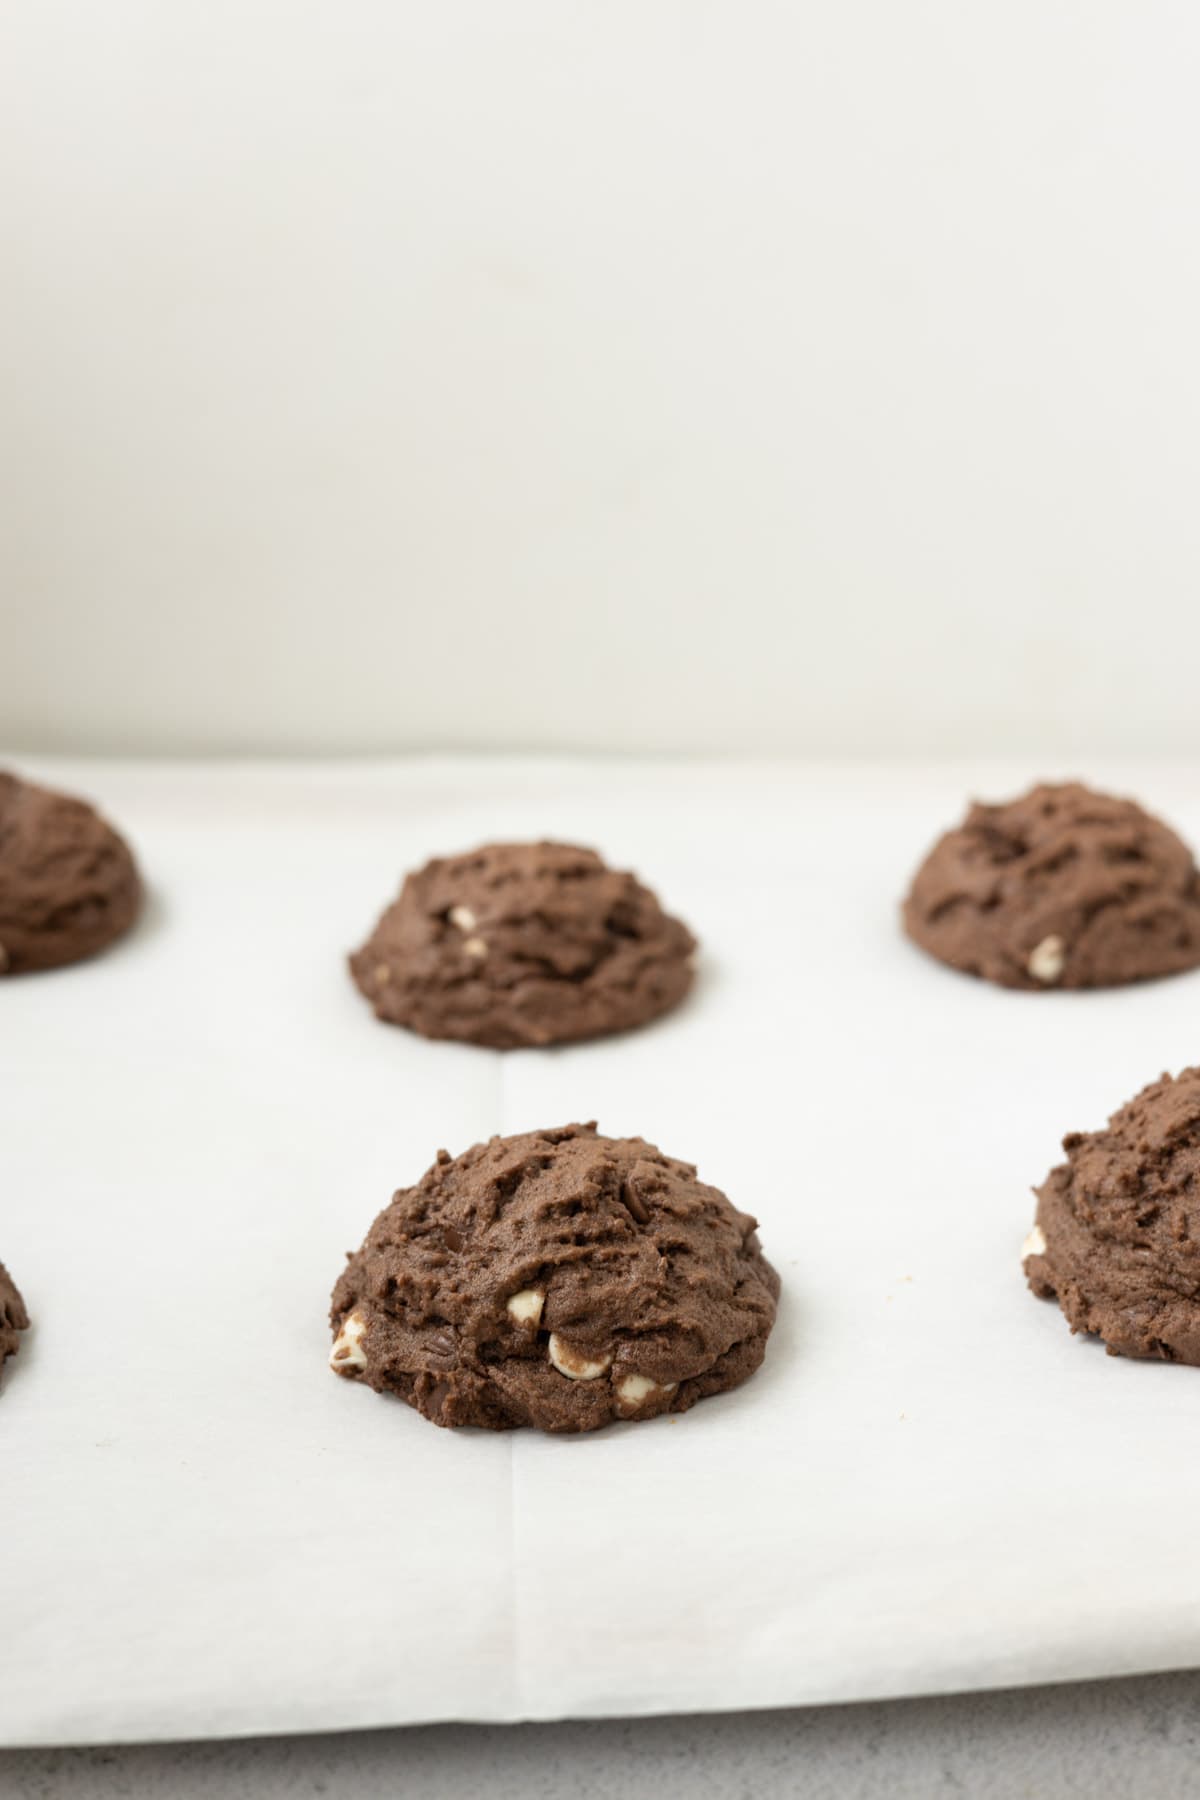 Baked chocolate chocolate chip cookies on a baking sheet.